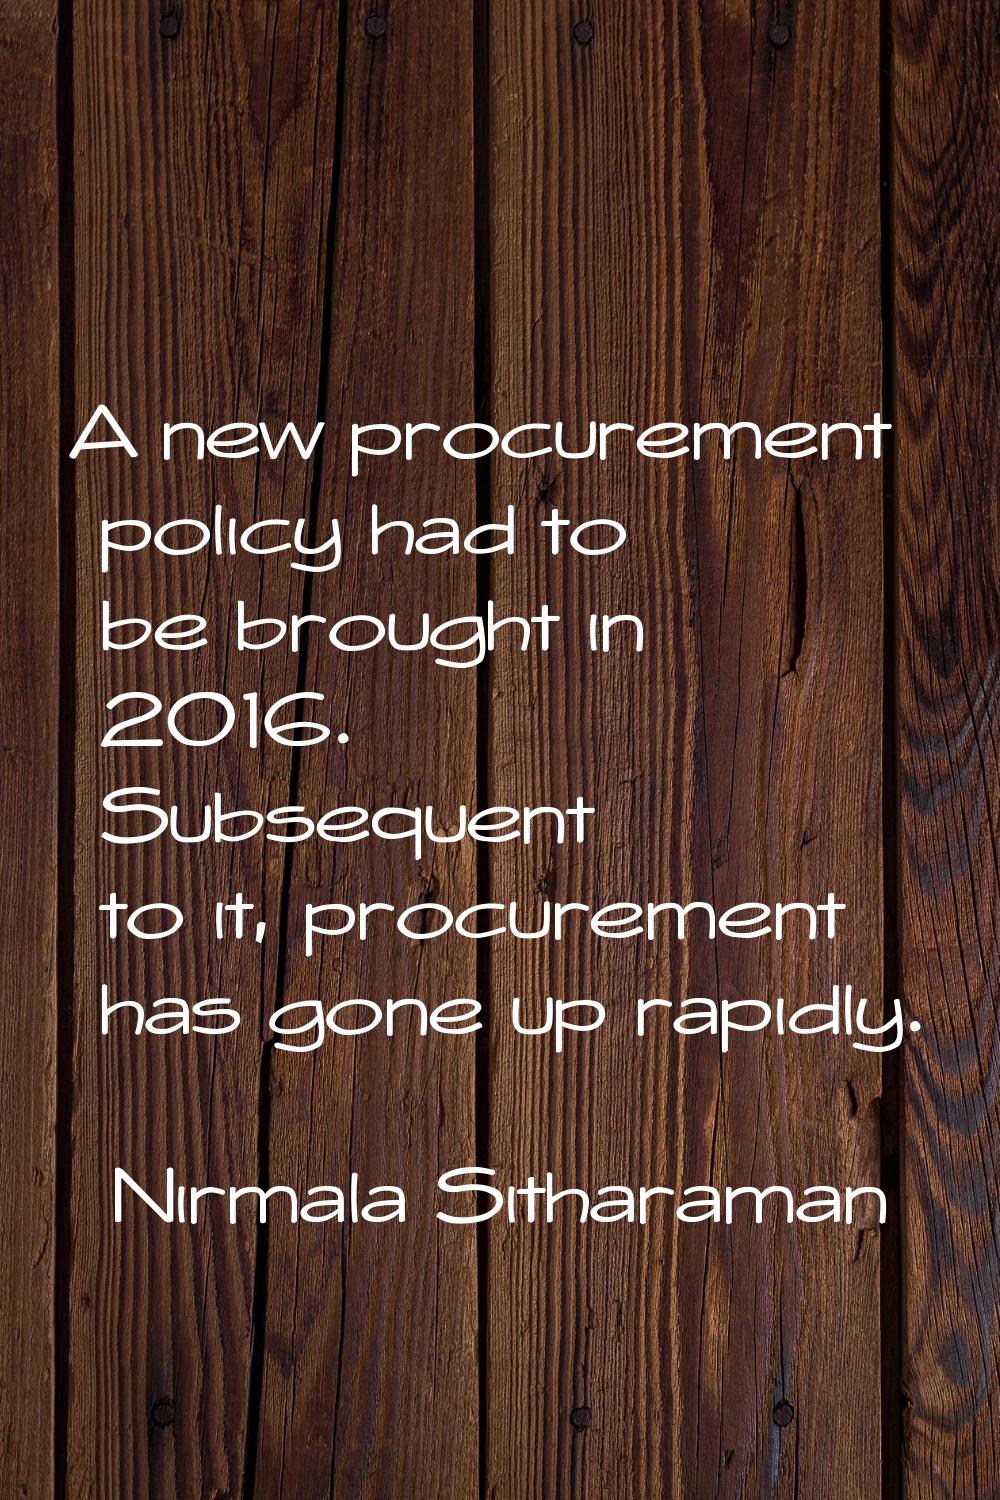 A new procurement policy had to be brought in 2016. Subsequent to it, procurement has gone up rapid